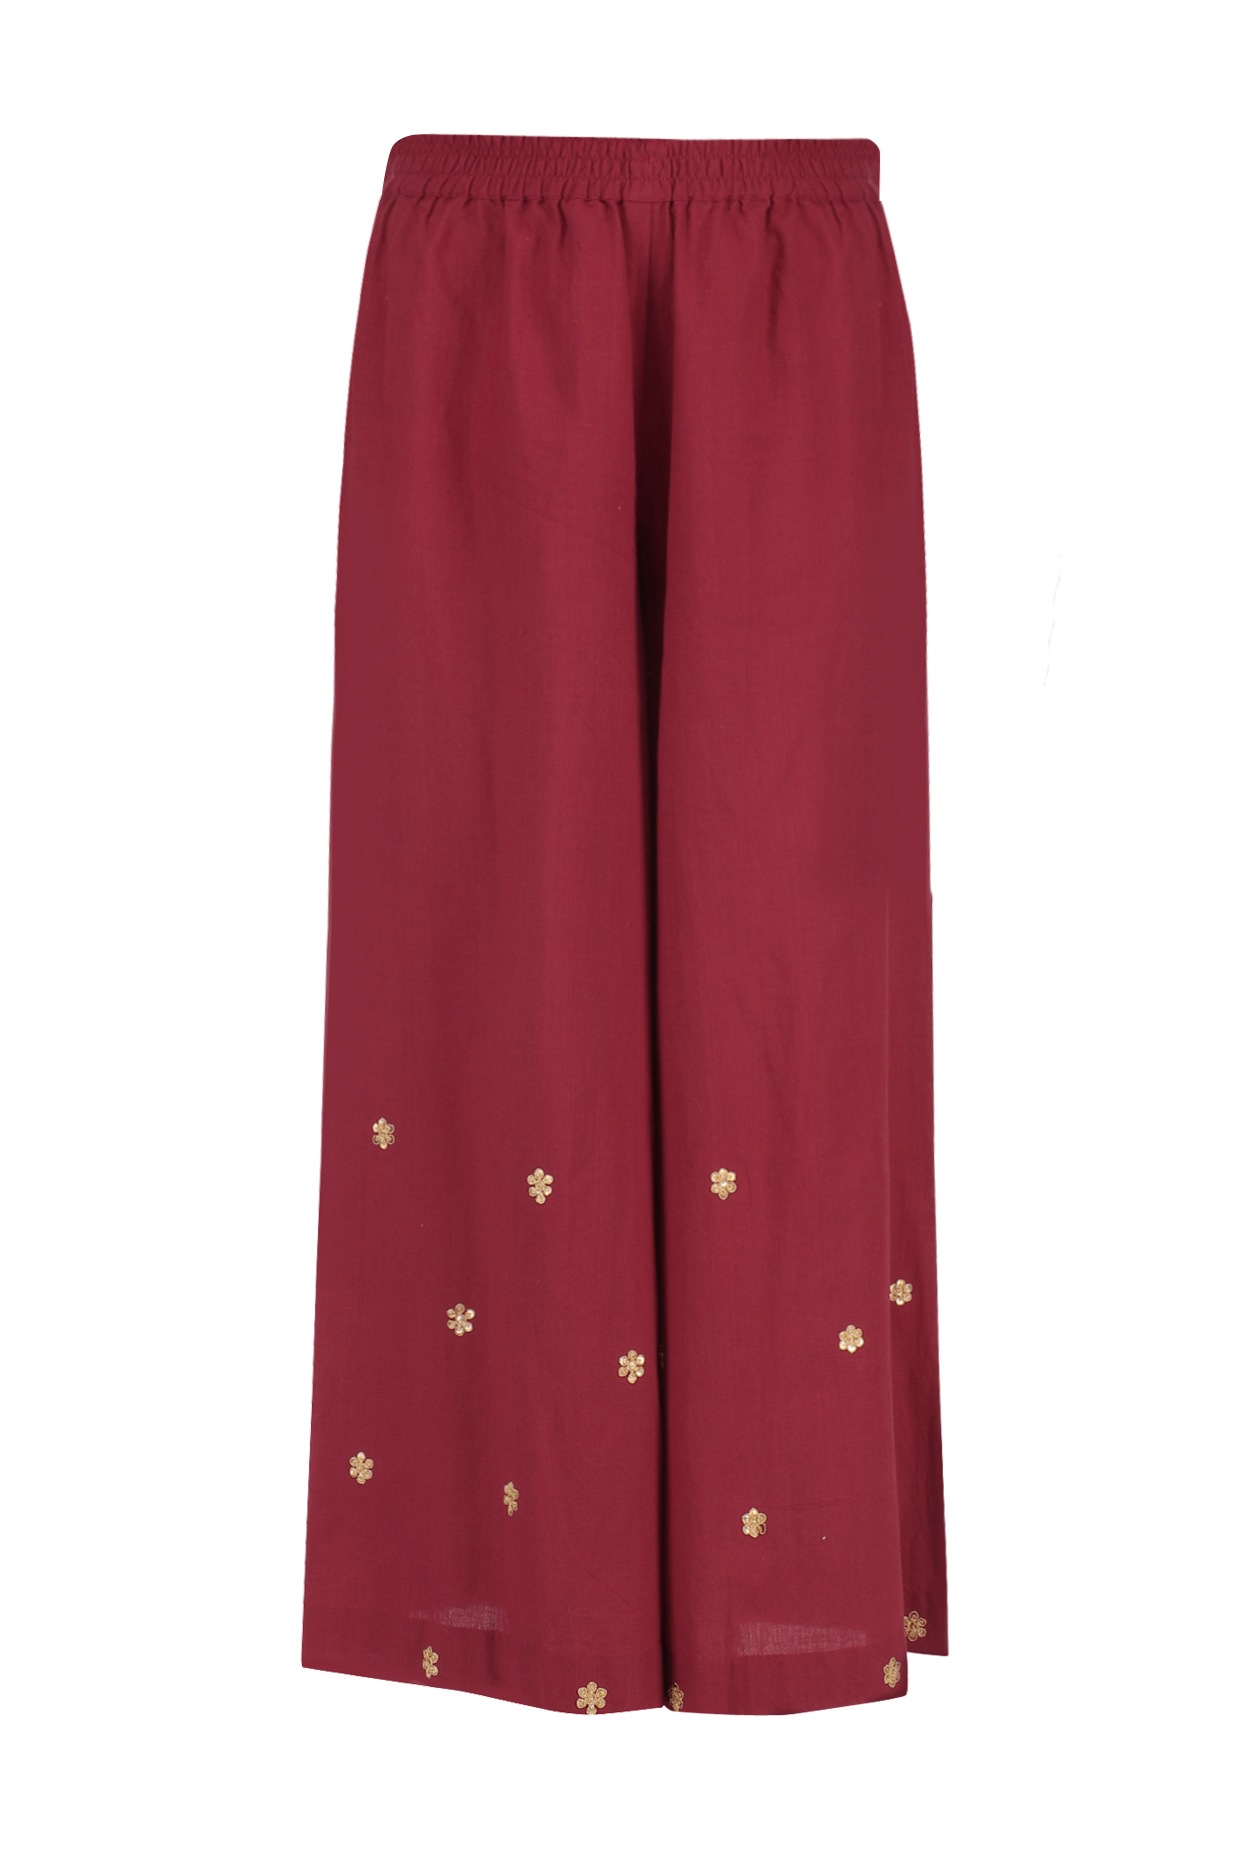 Outfit of the Day – Maroon Palazzo Pants | Outfits, Fashion, Outfit of the  day